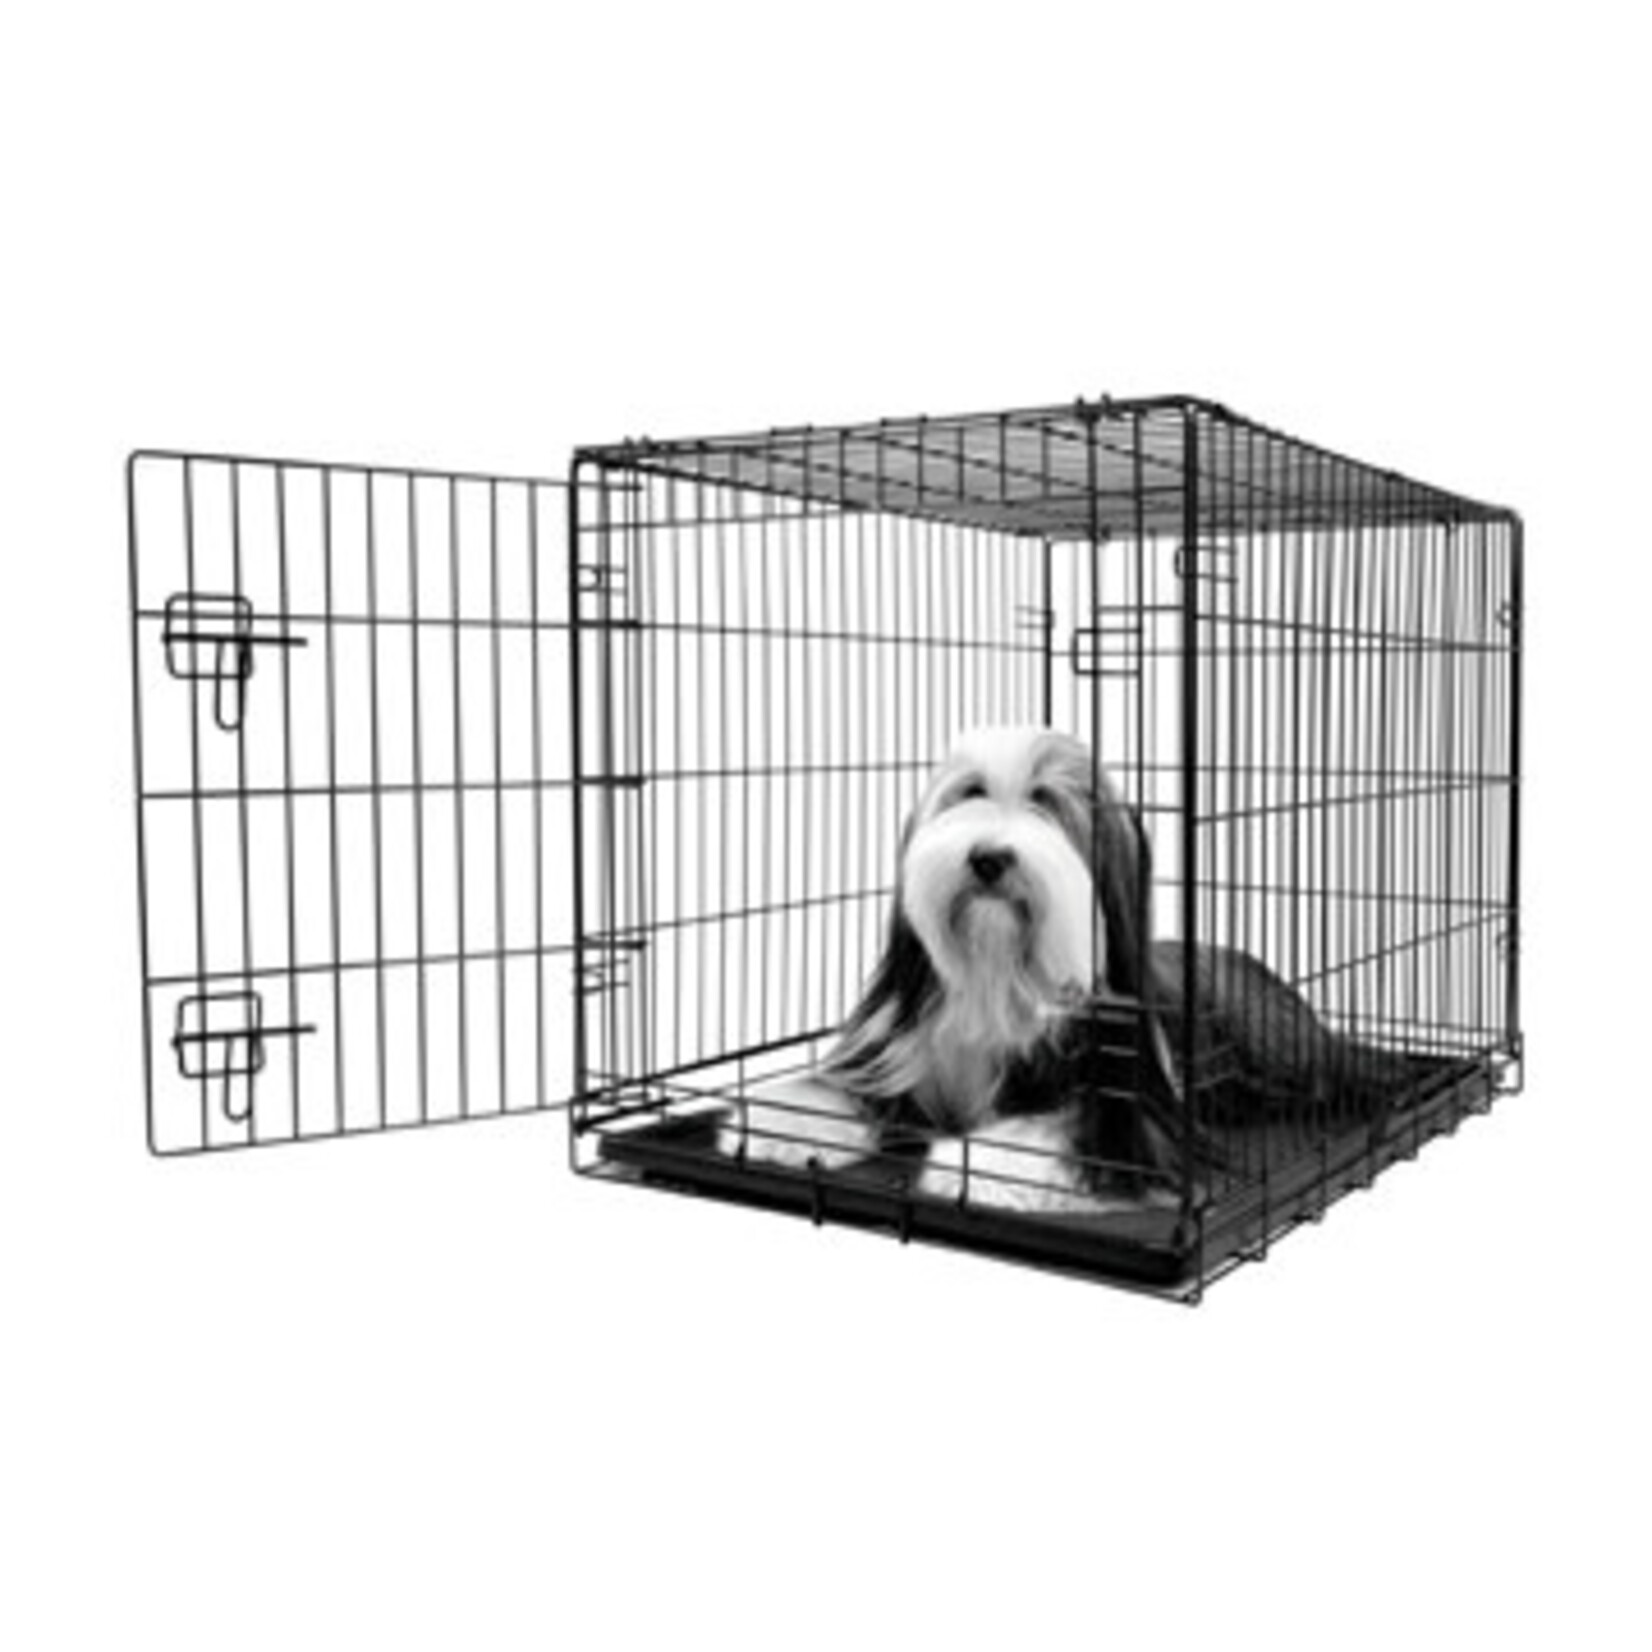 DogIt Dogit Single Door Wire Crate - Large - 91 x 56 x 62 cm (36 x 22 x 24.5 in)